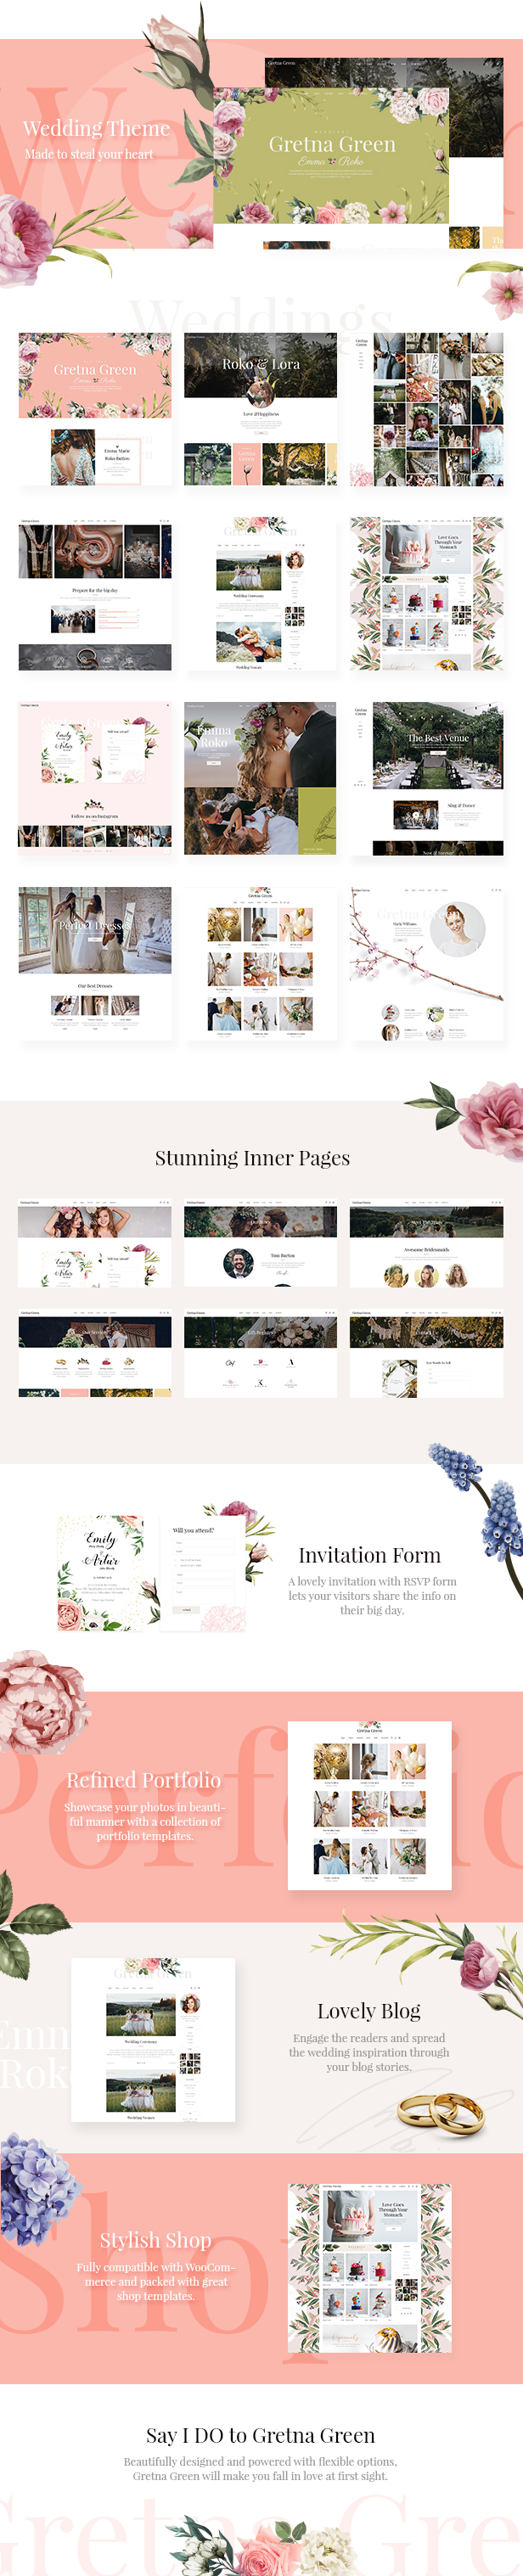 WordPress theme Gretna Green - A Stylish Theme for Weddings, Event Planners and Celebrations (Wedding)